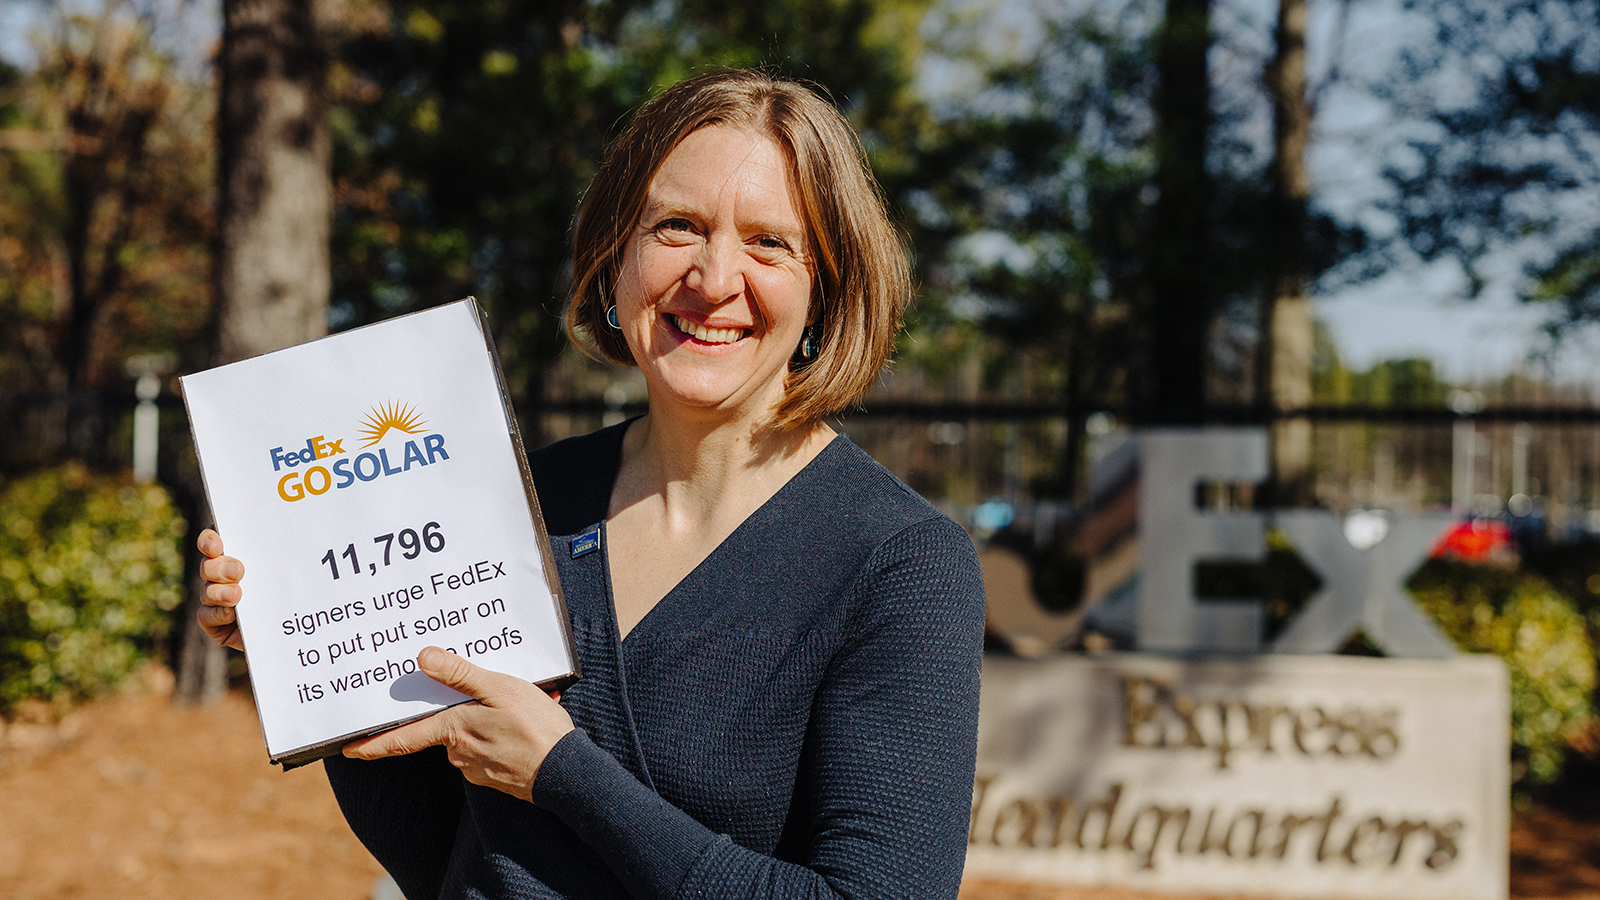 Environment America’s Johanna Neumann delivered more than 11,000 petition signatures from everyday Americans to encourage FedEx to put solar panels on its warehouse roofs.